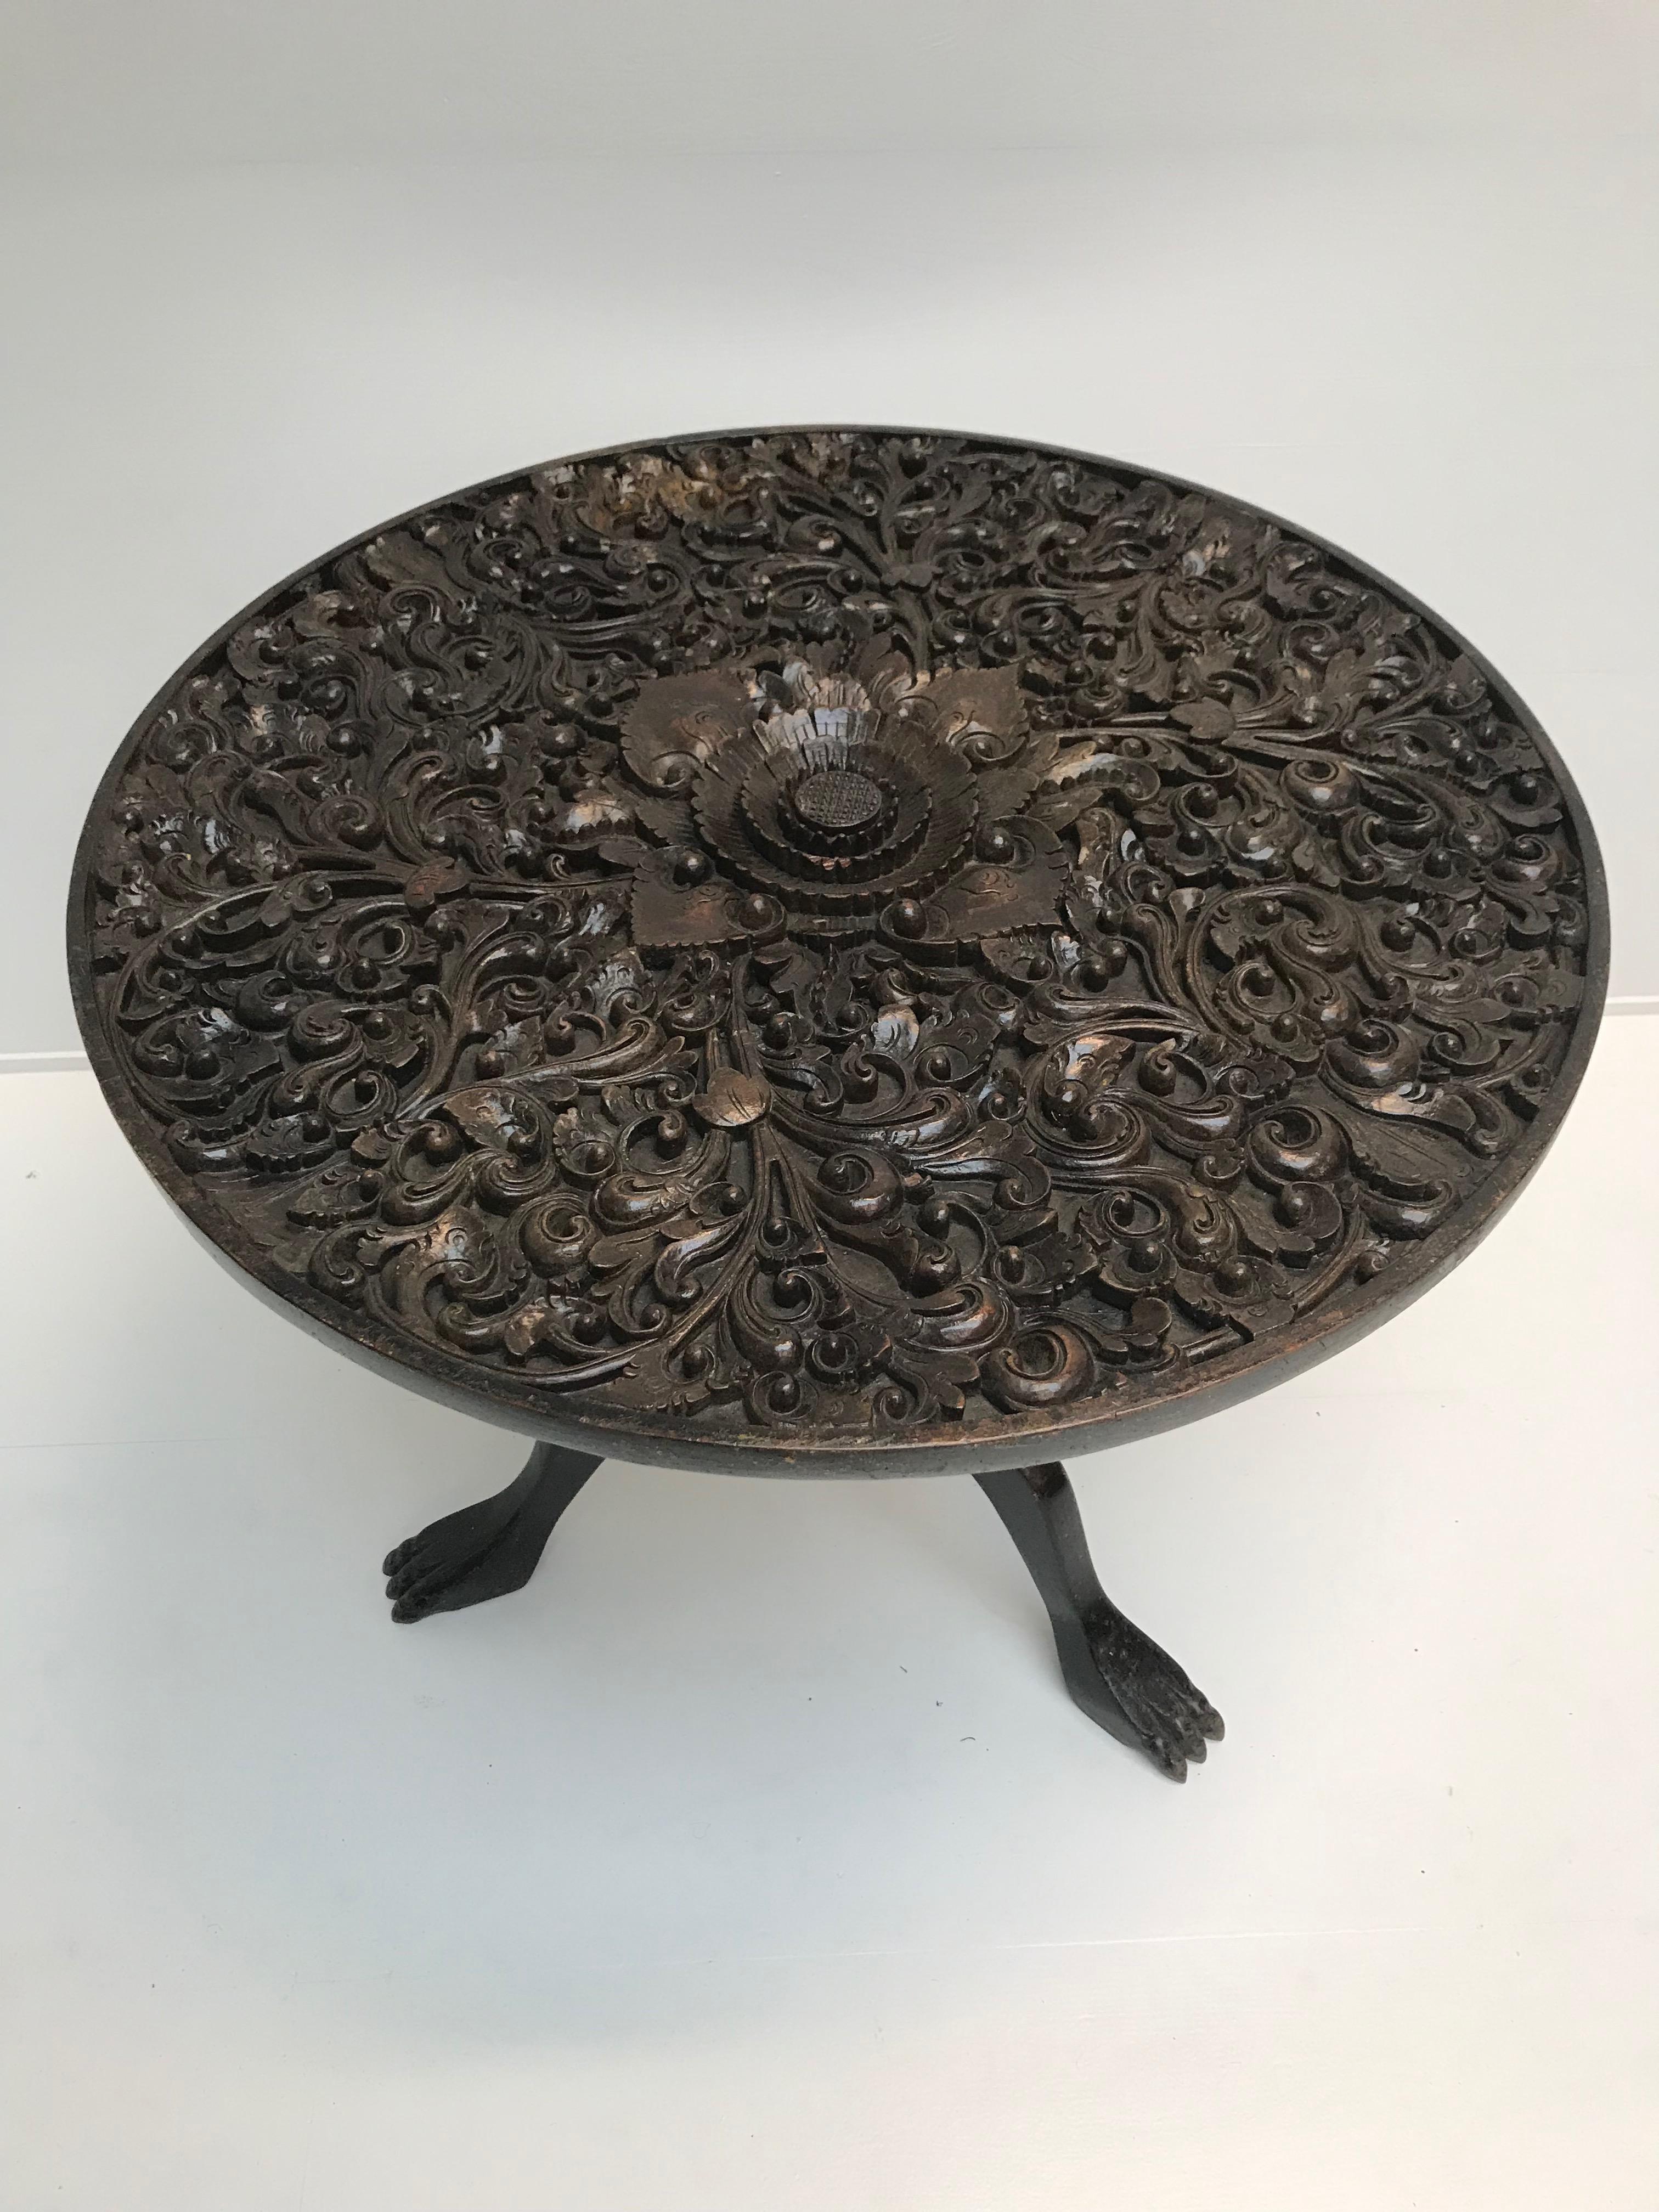 Exceptional carved tripod table
Teak wood
South East Asia, Bali
Nice flower carving in the traditional style.